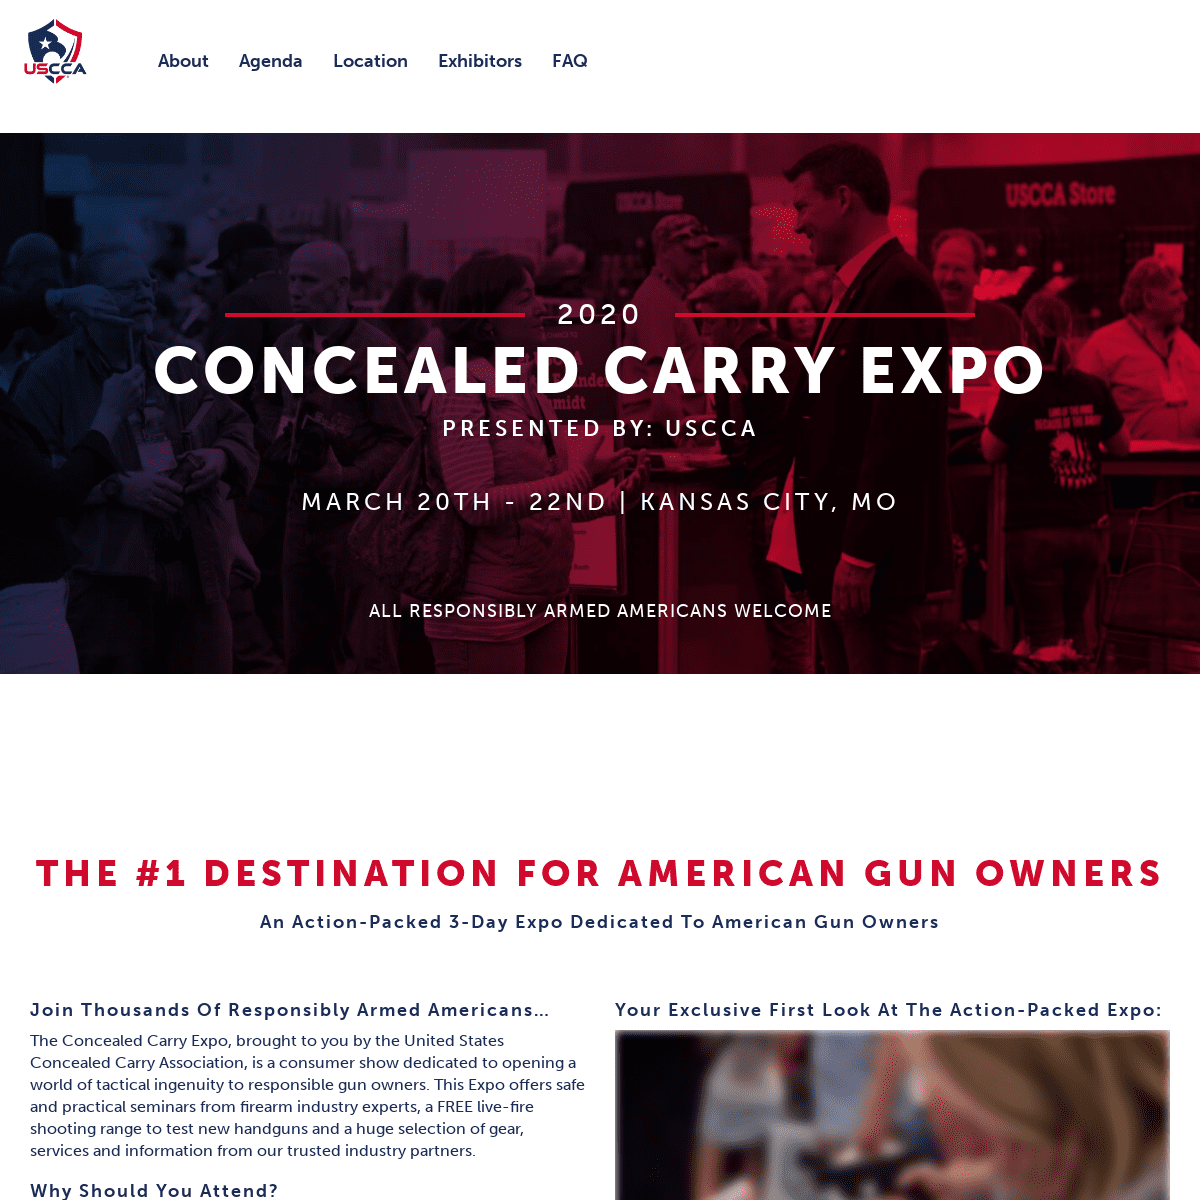 2019 USCCA Concealed Carry Expo | MAY 17th - MAY 19th | Pittsburgh, PA